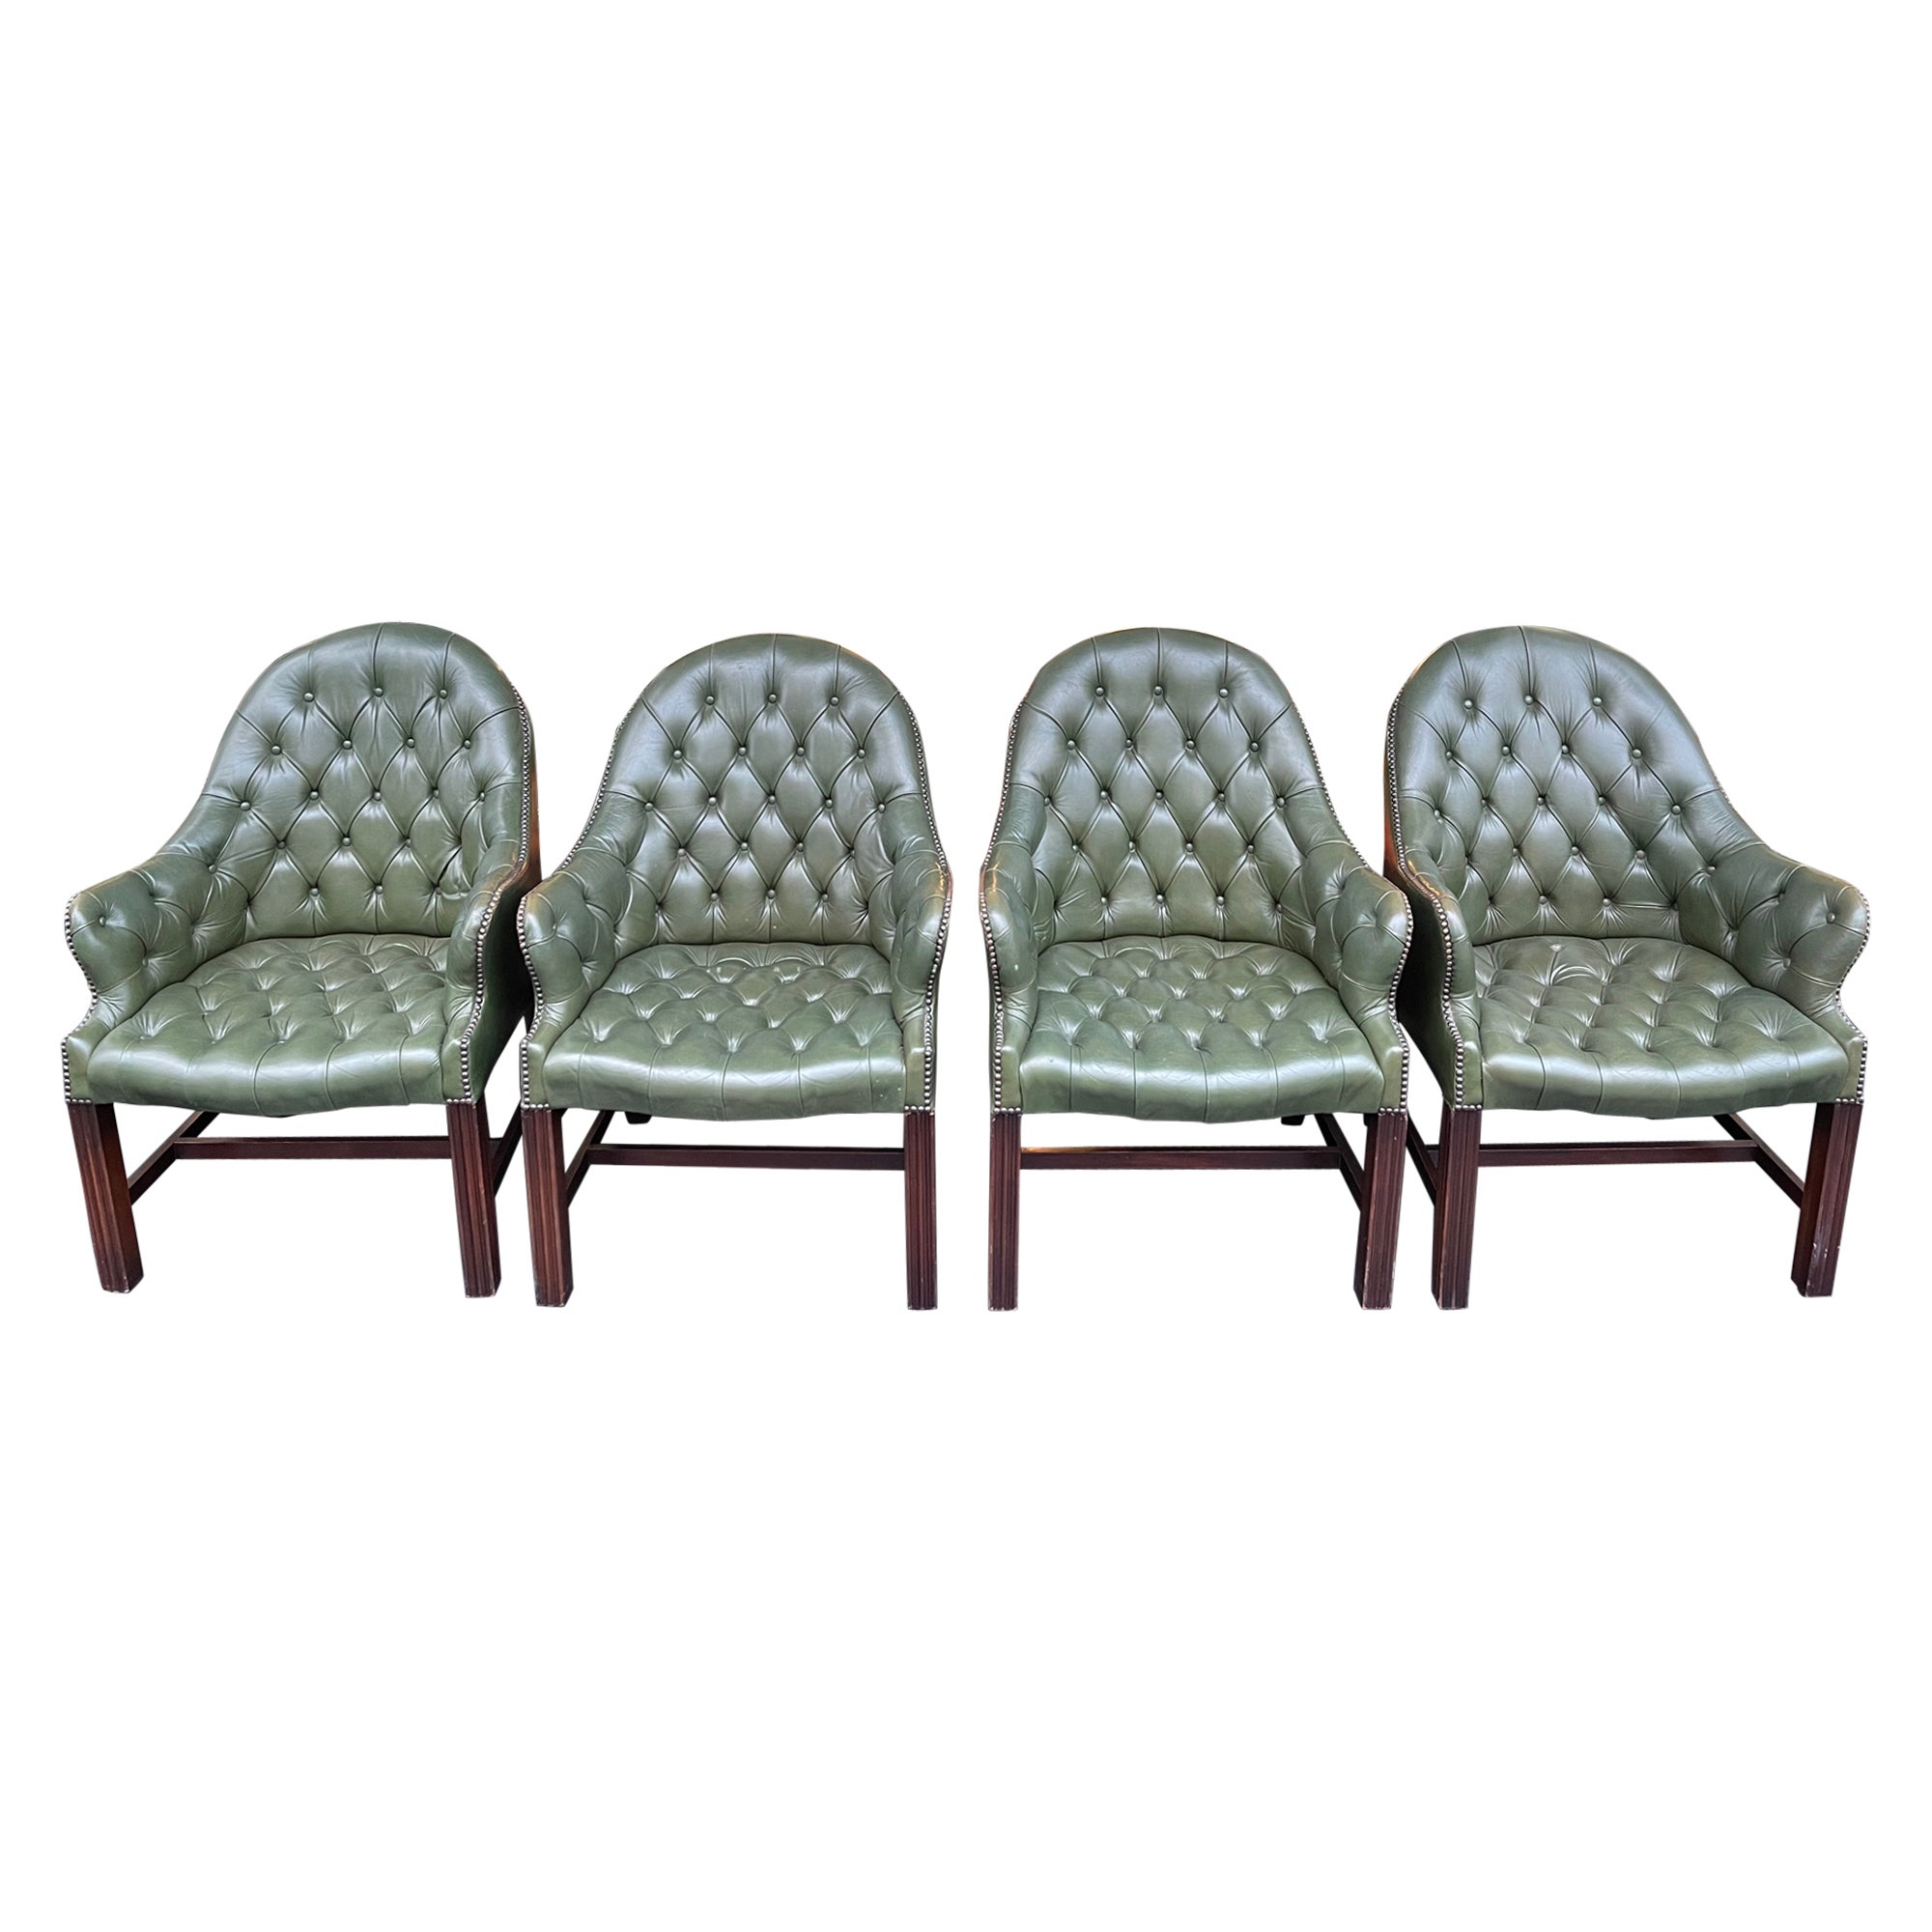 Set of 4 English Chesterfield Lounge Chairs / Armchairs, WADE , 20th Century For Sale